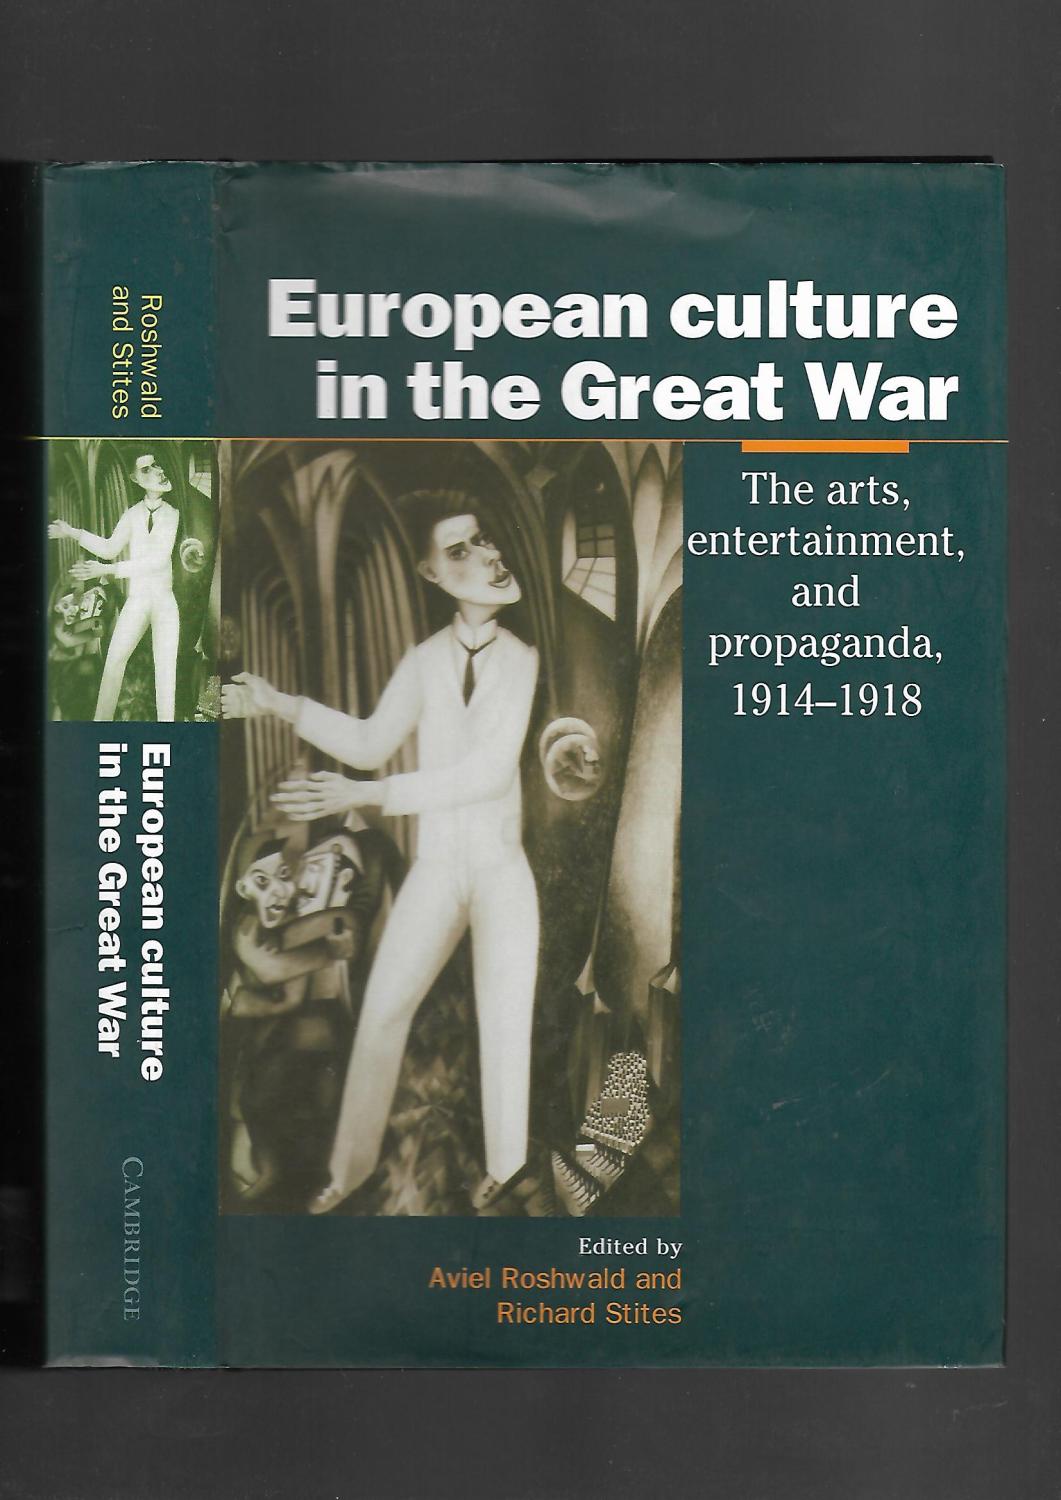 European Culture in the Great War: The Arts, Entertainment and Propaganda, 1914-1918 (Studies in the Social and Cultural History of Modern Warfare) - Edited by Aviel Roshwald & Richard Stites